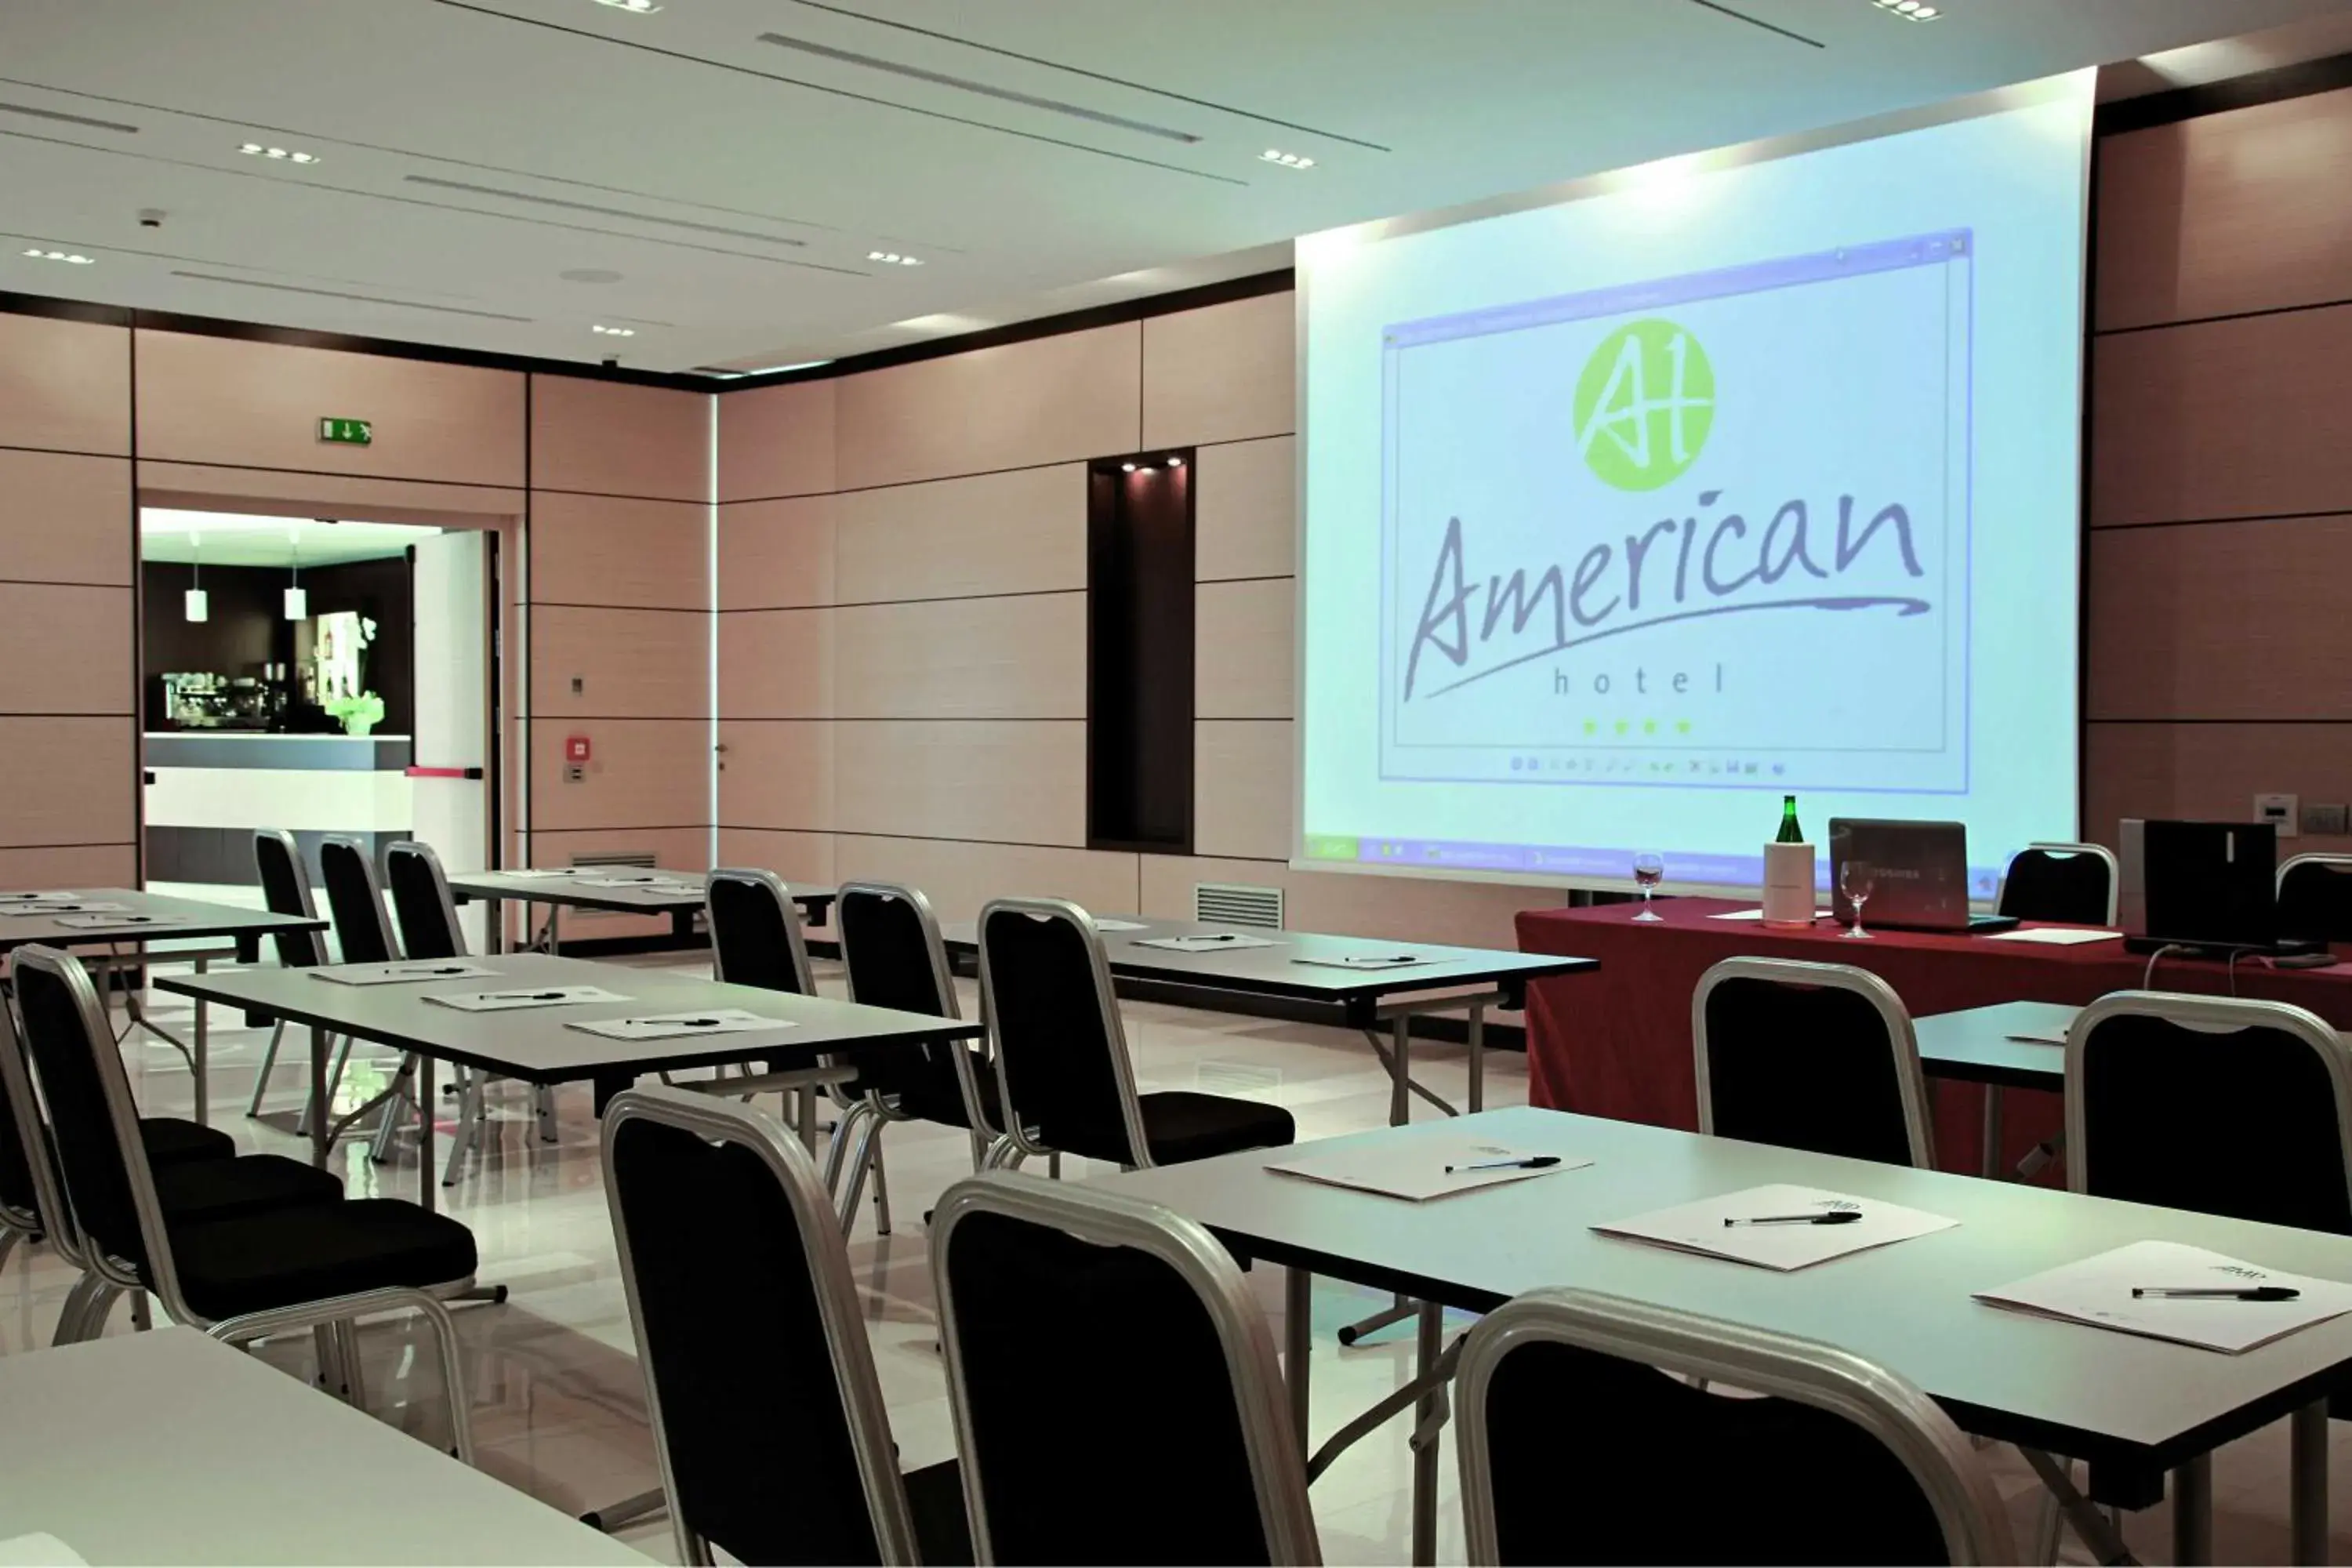 Business facilities in American Hotel